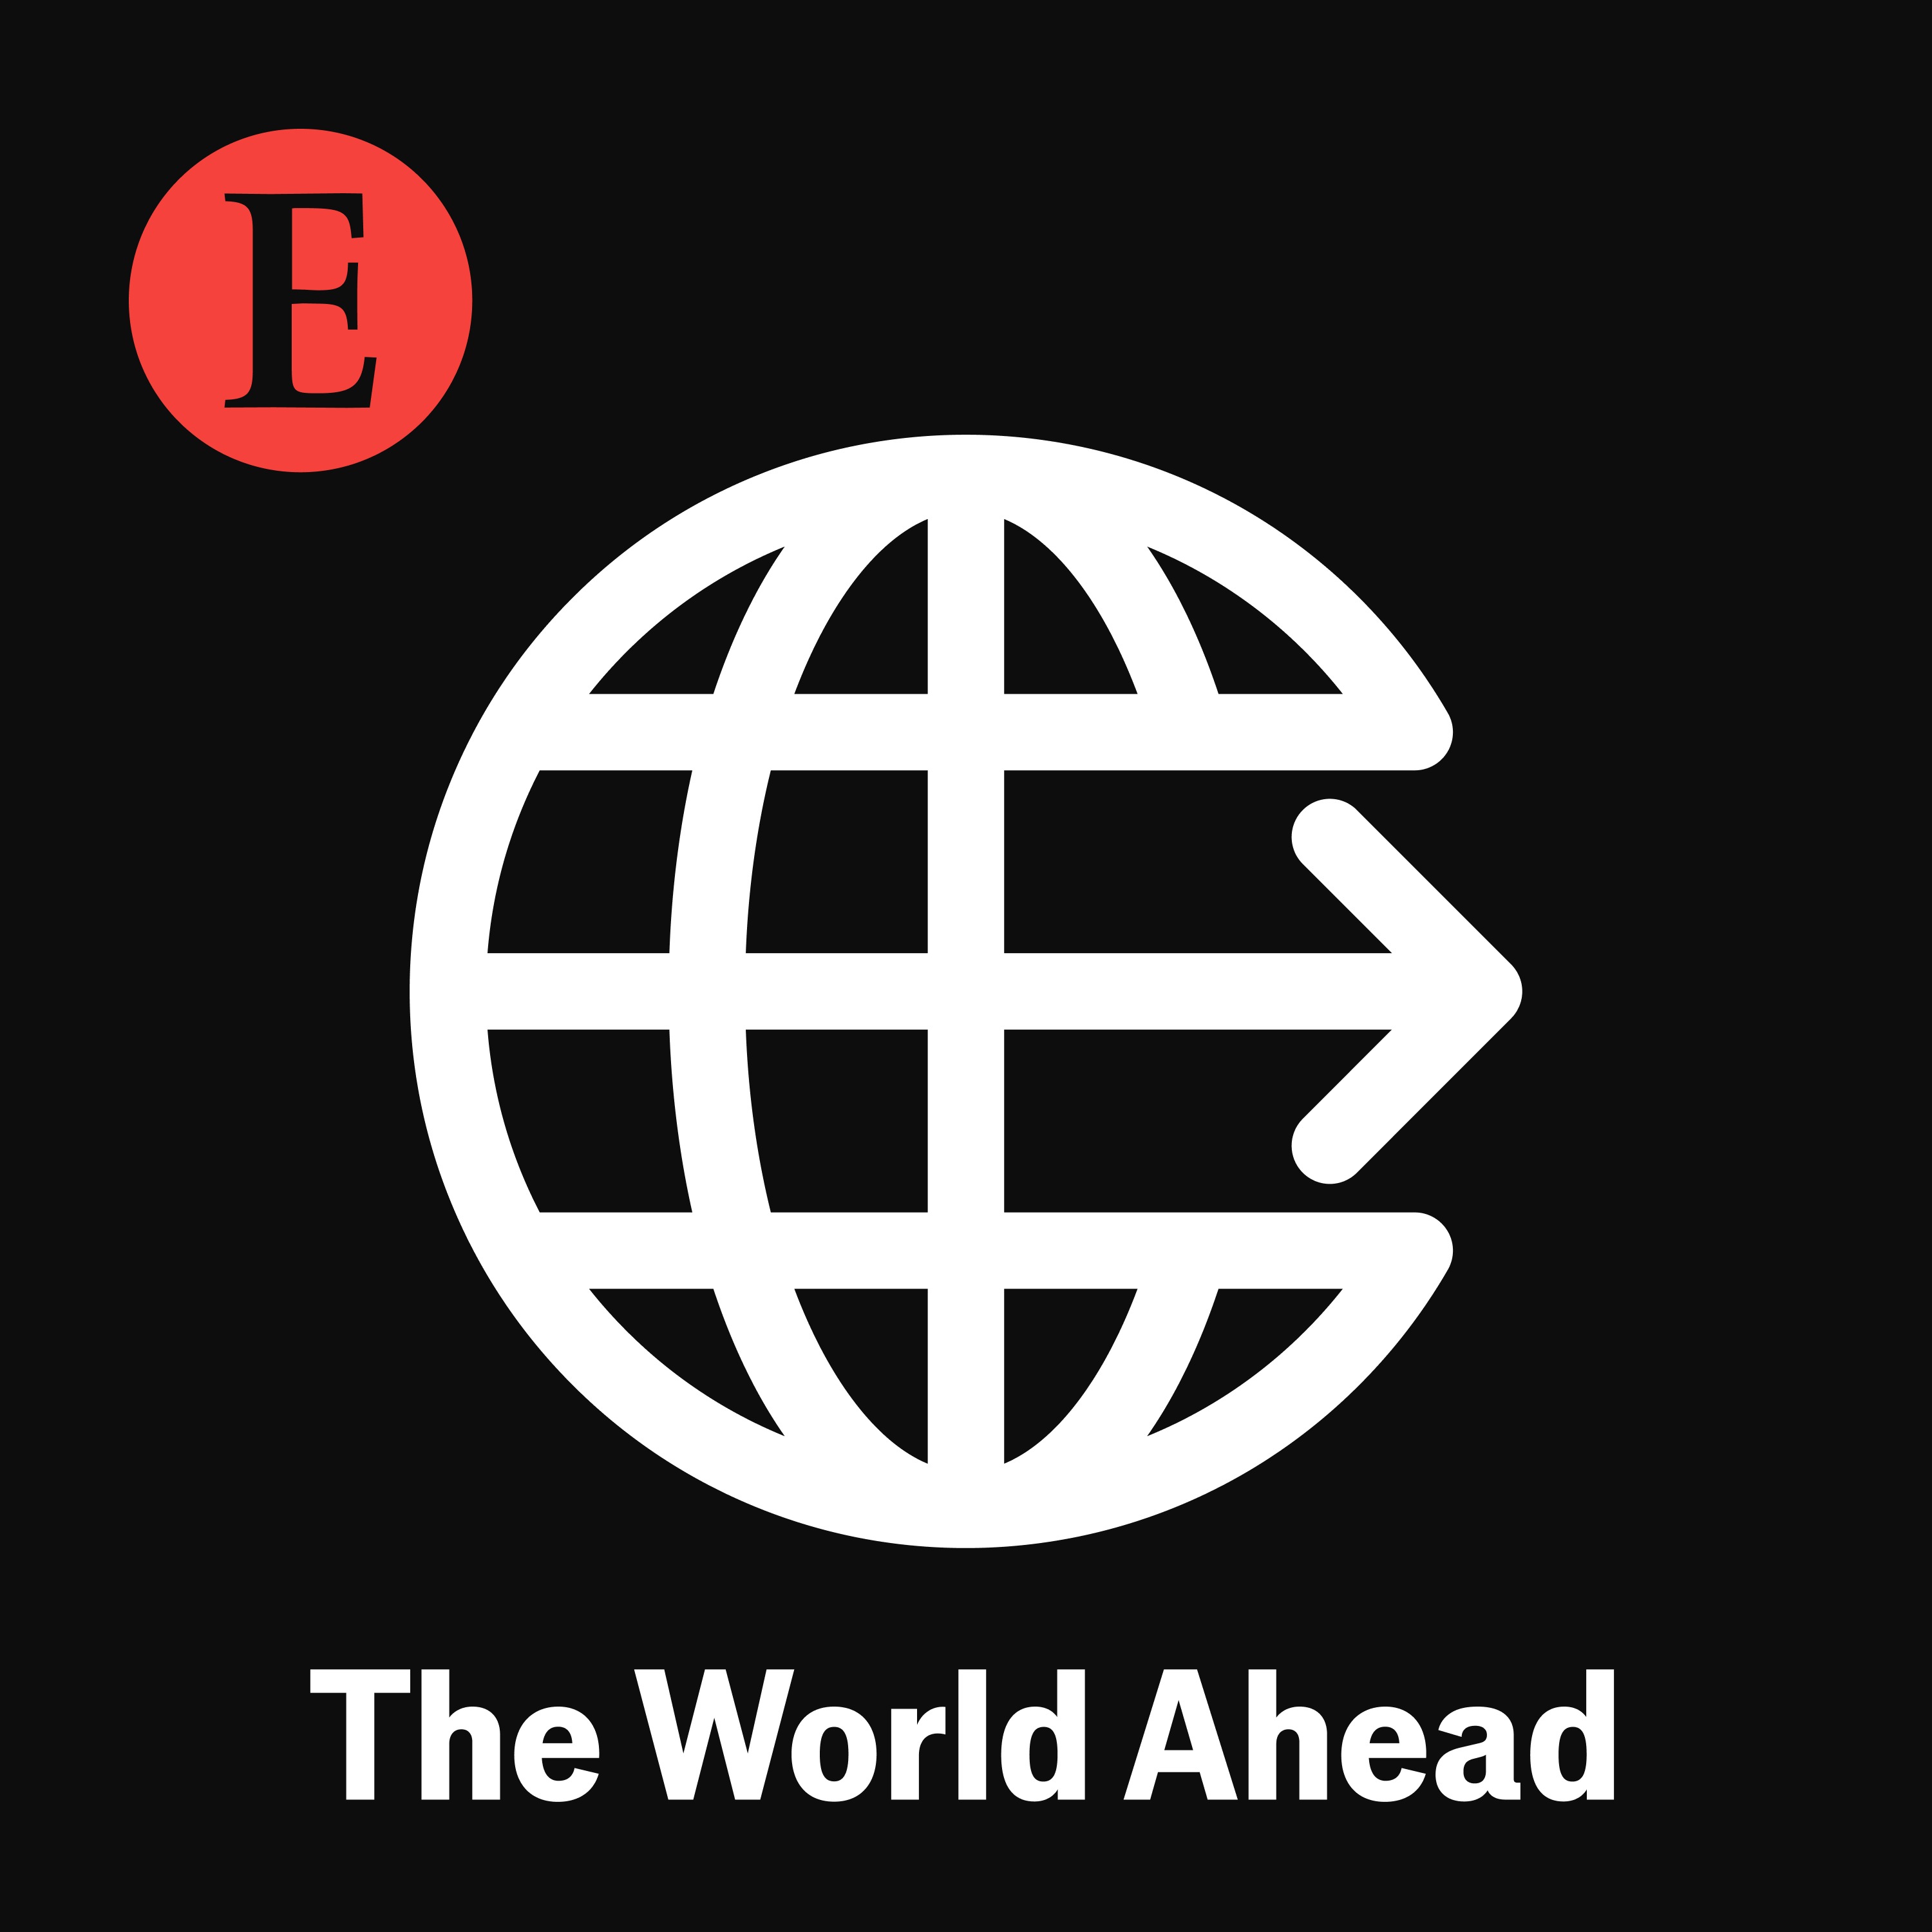 The World Ahead from The Economist